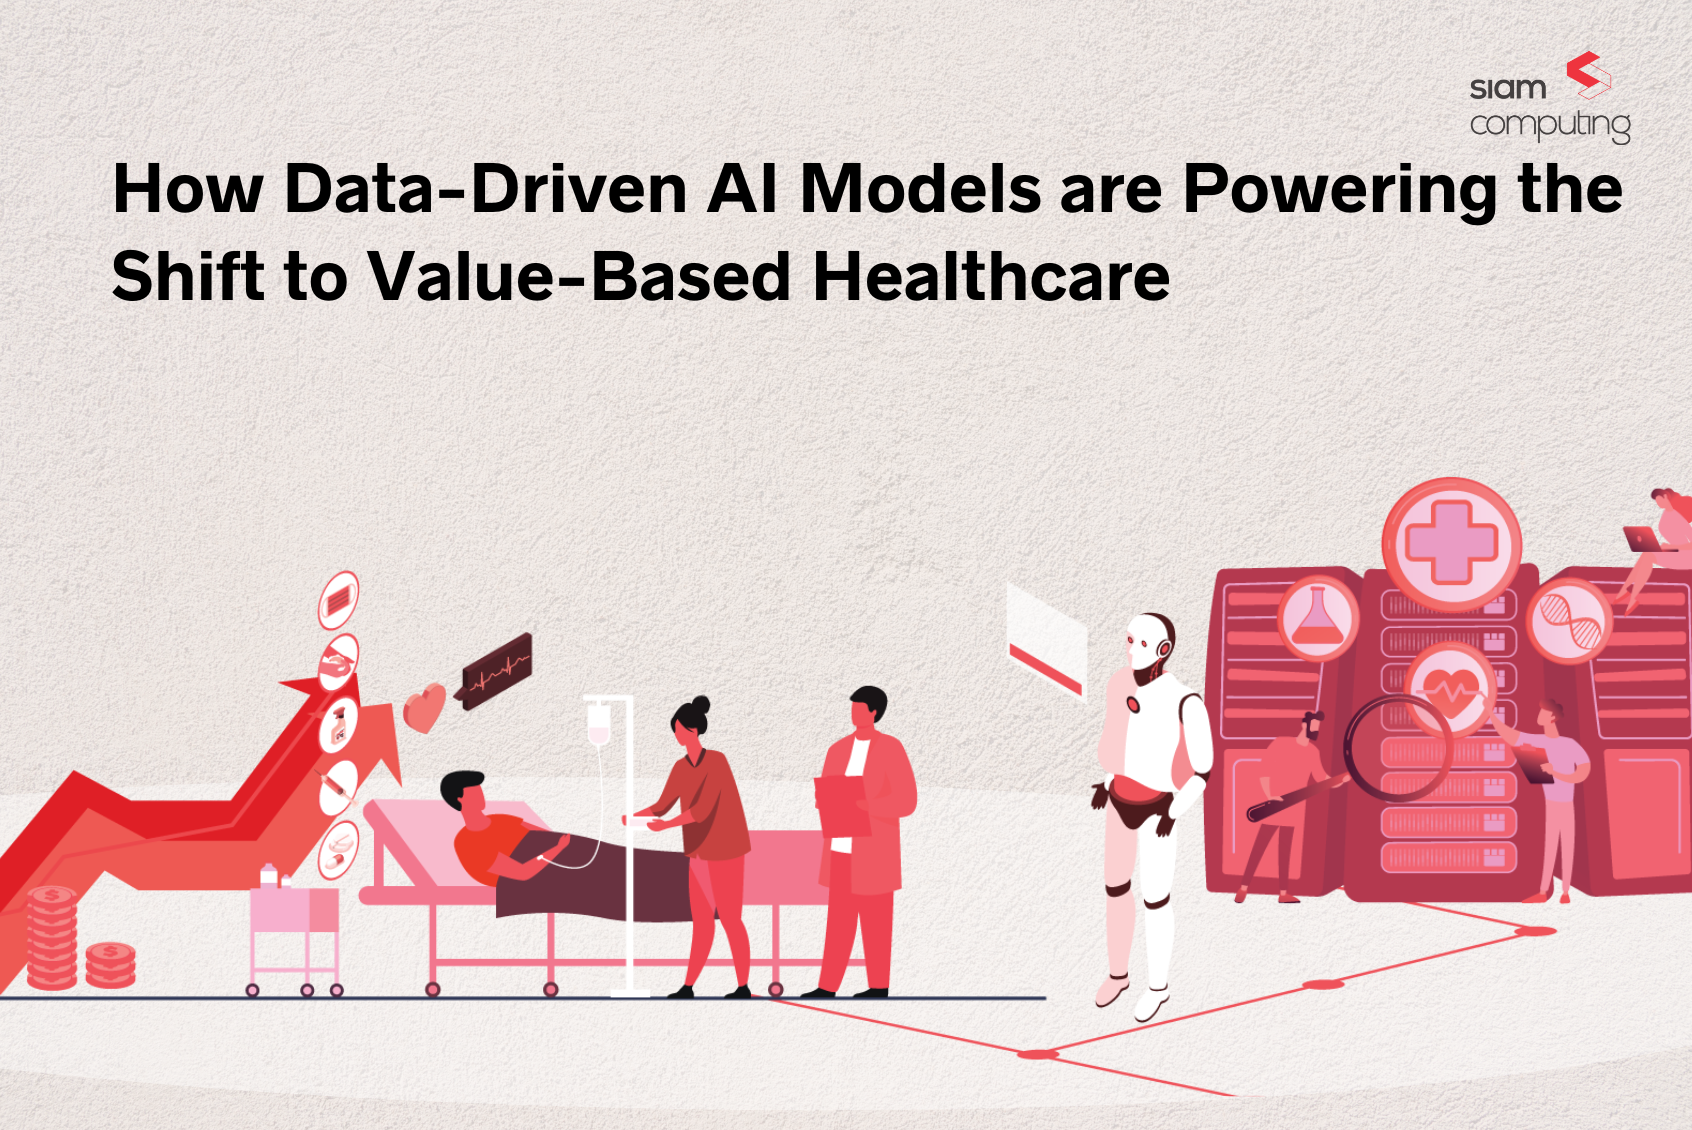 How Data-Driven AI Models are Powering the Shift to Value-Based Healthcare